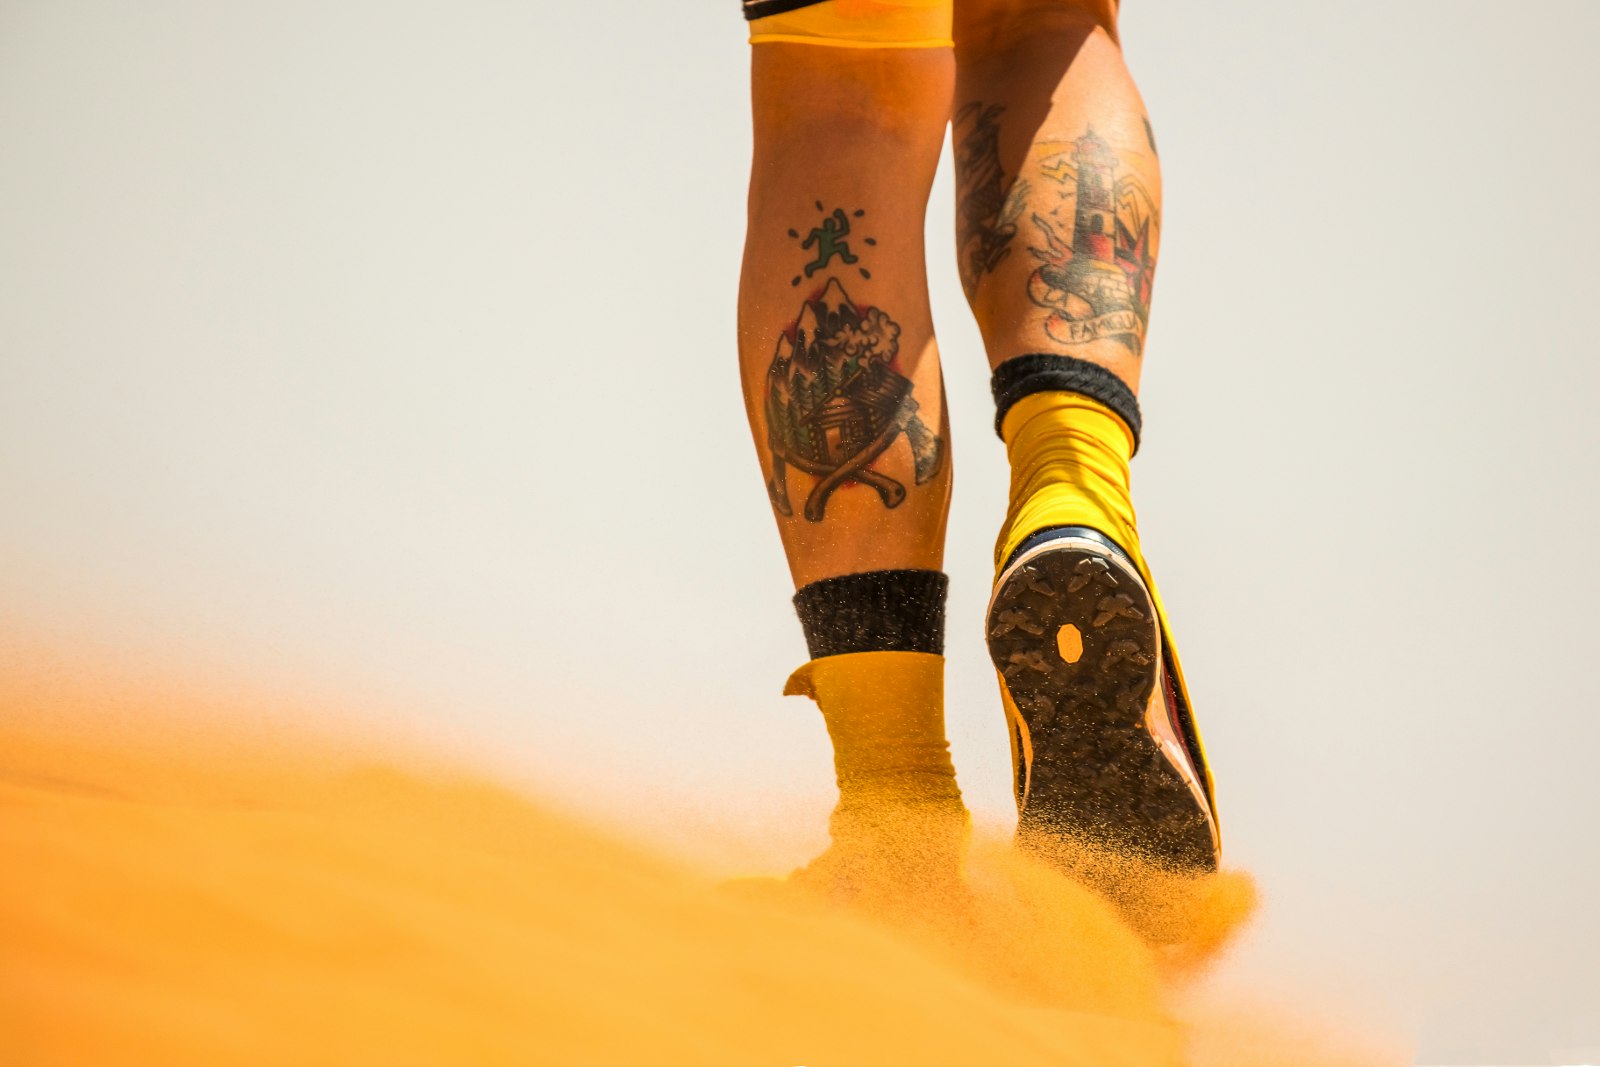 The image features the lower legs of an ultra runner from behind; the calf muscles both have large tattoos on them. Wind blows sand to the left that has been kicked up by the runner's foot